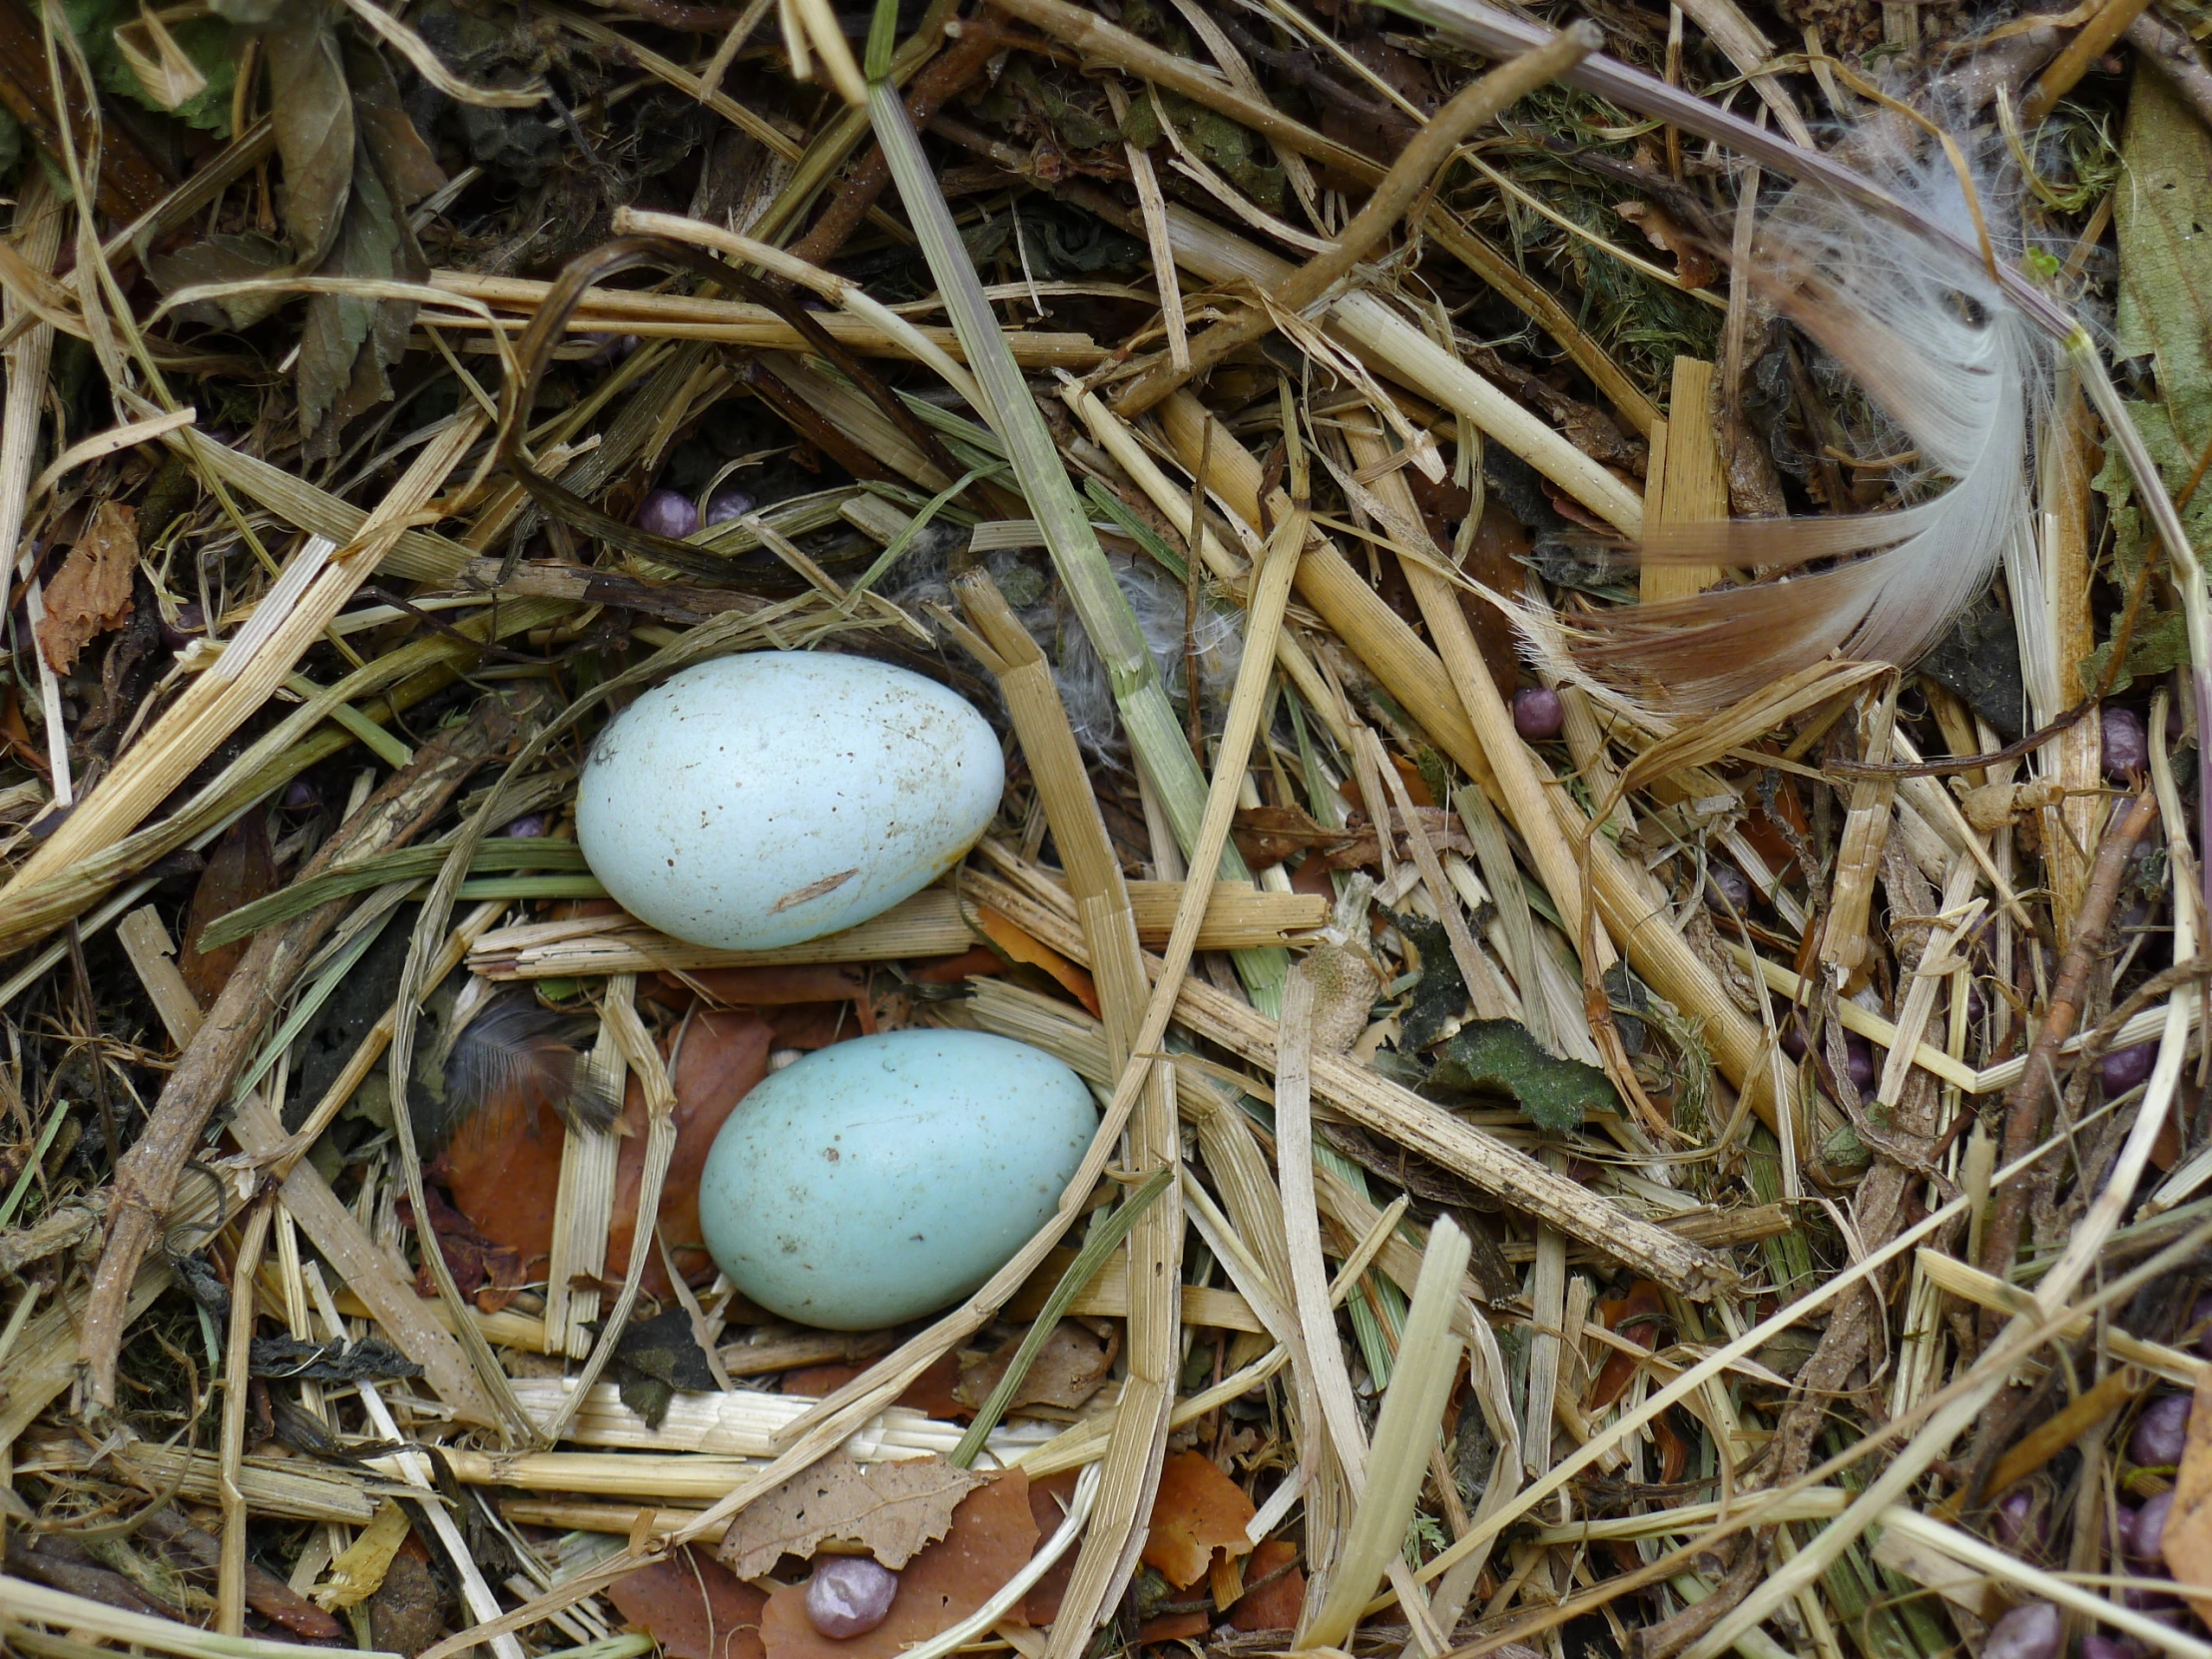 three eggs are in the nest on the grass